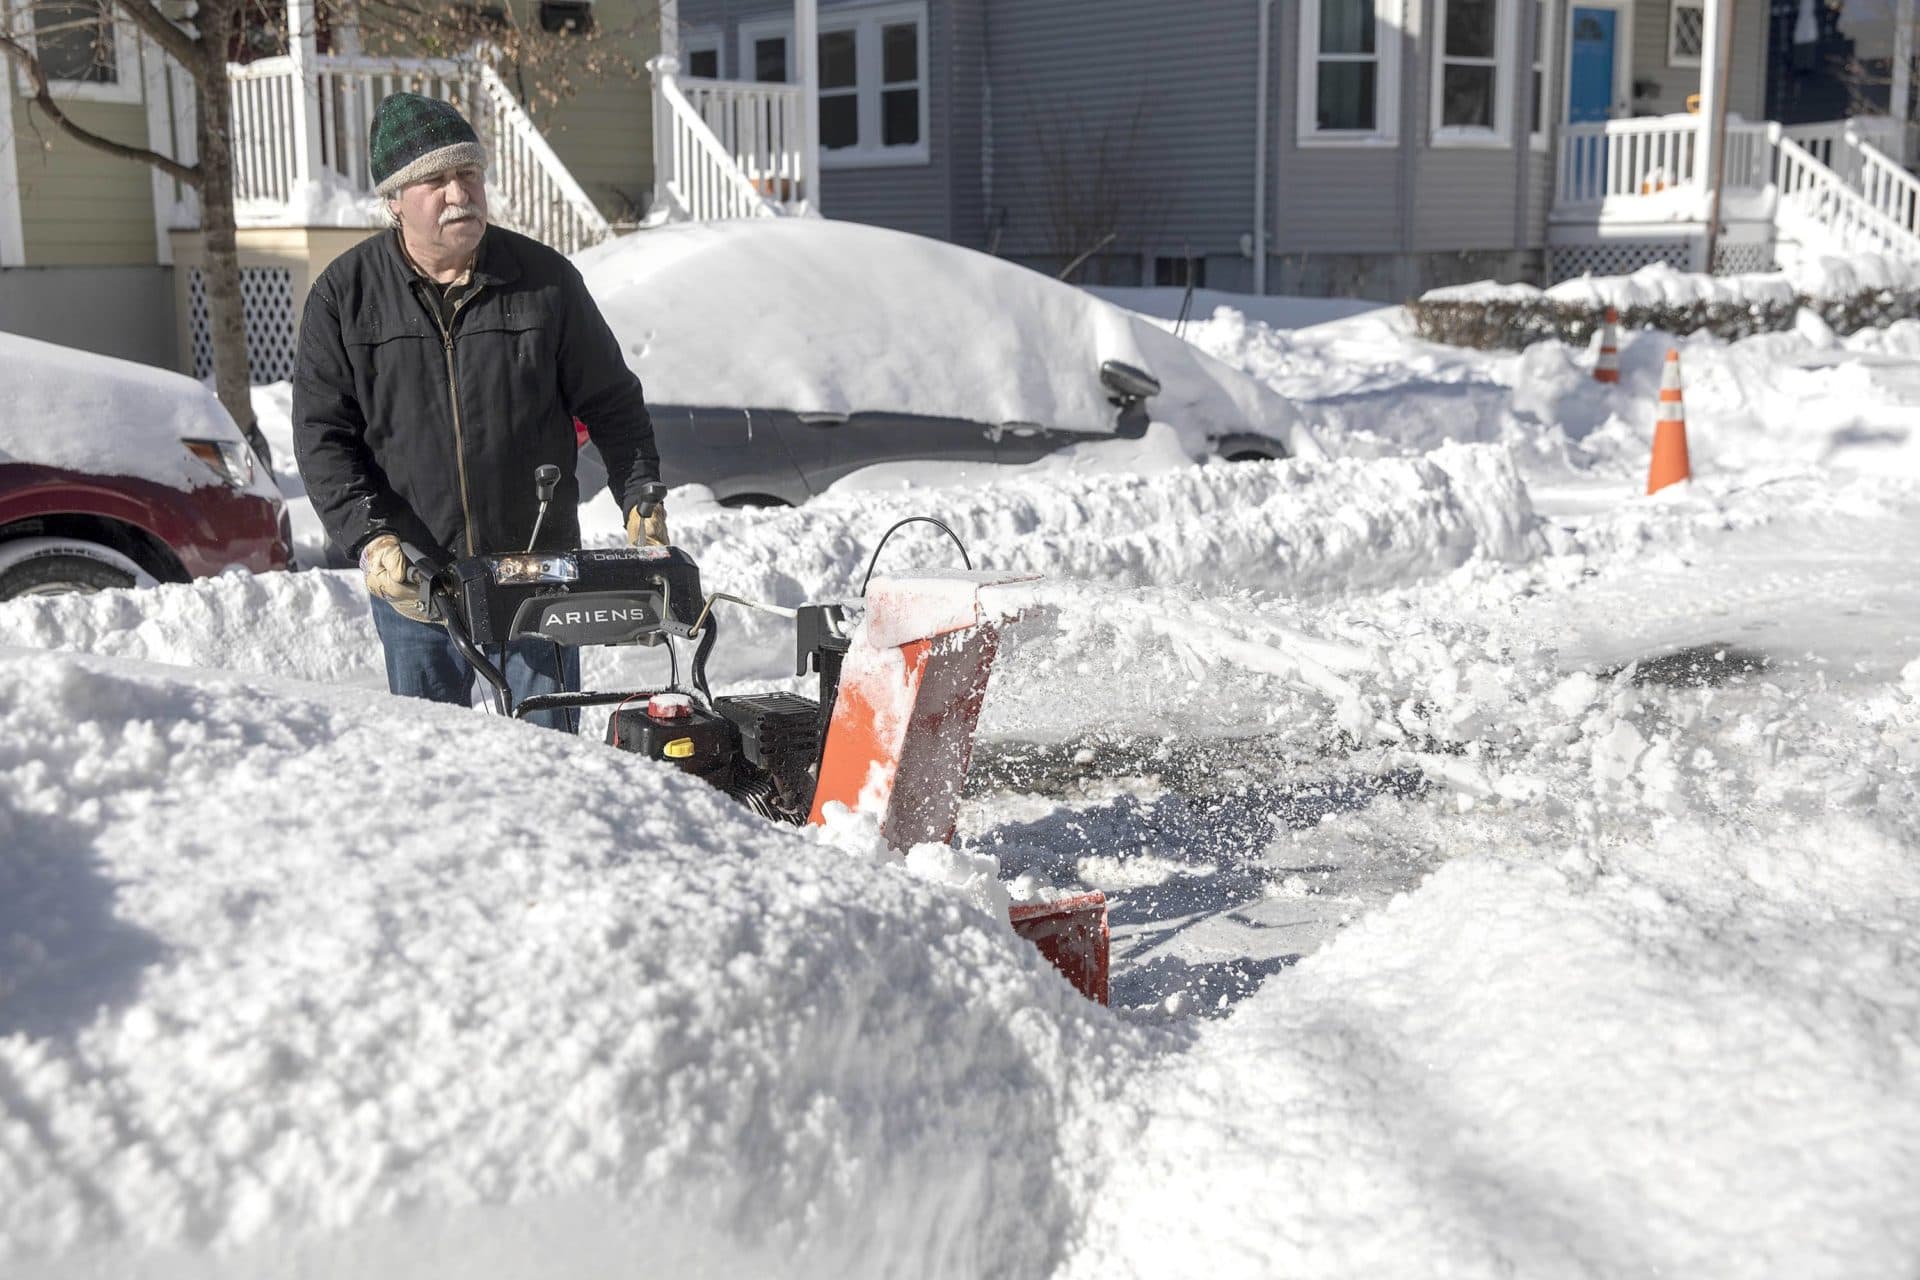 Don Drisdell uses his snowblower to start digging out his neighbor's car in Cambridge. (Robin Lubbock/WBUR)